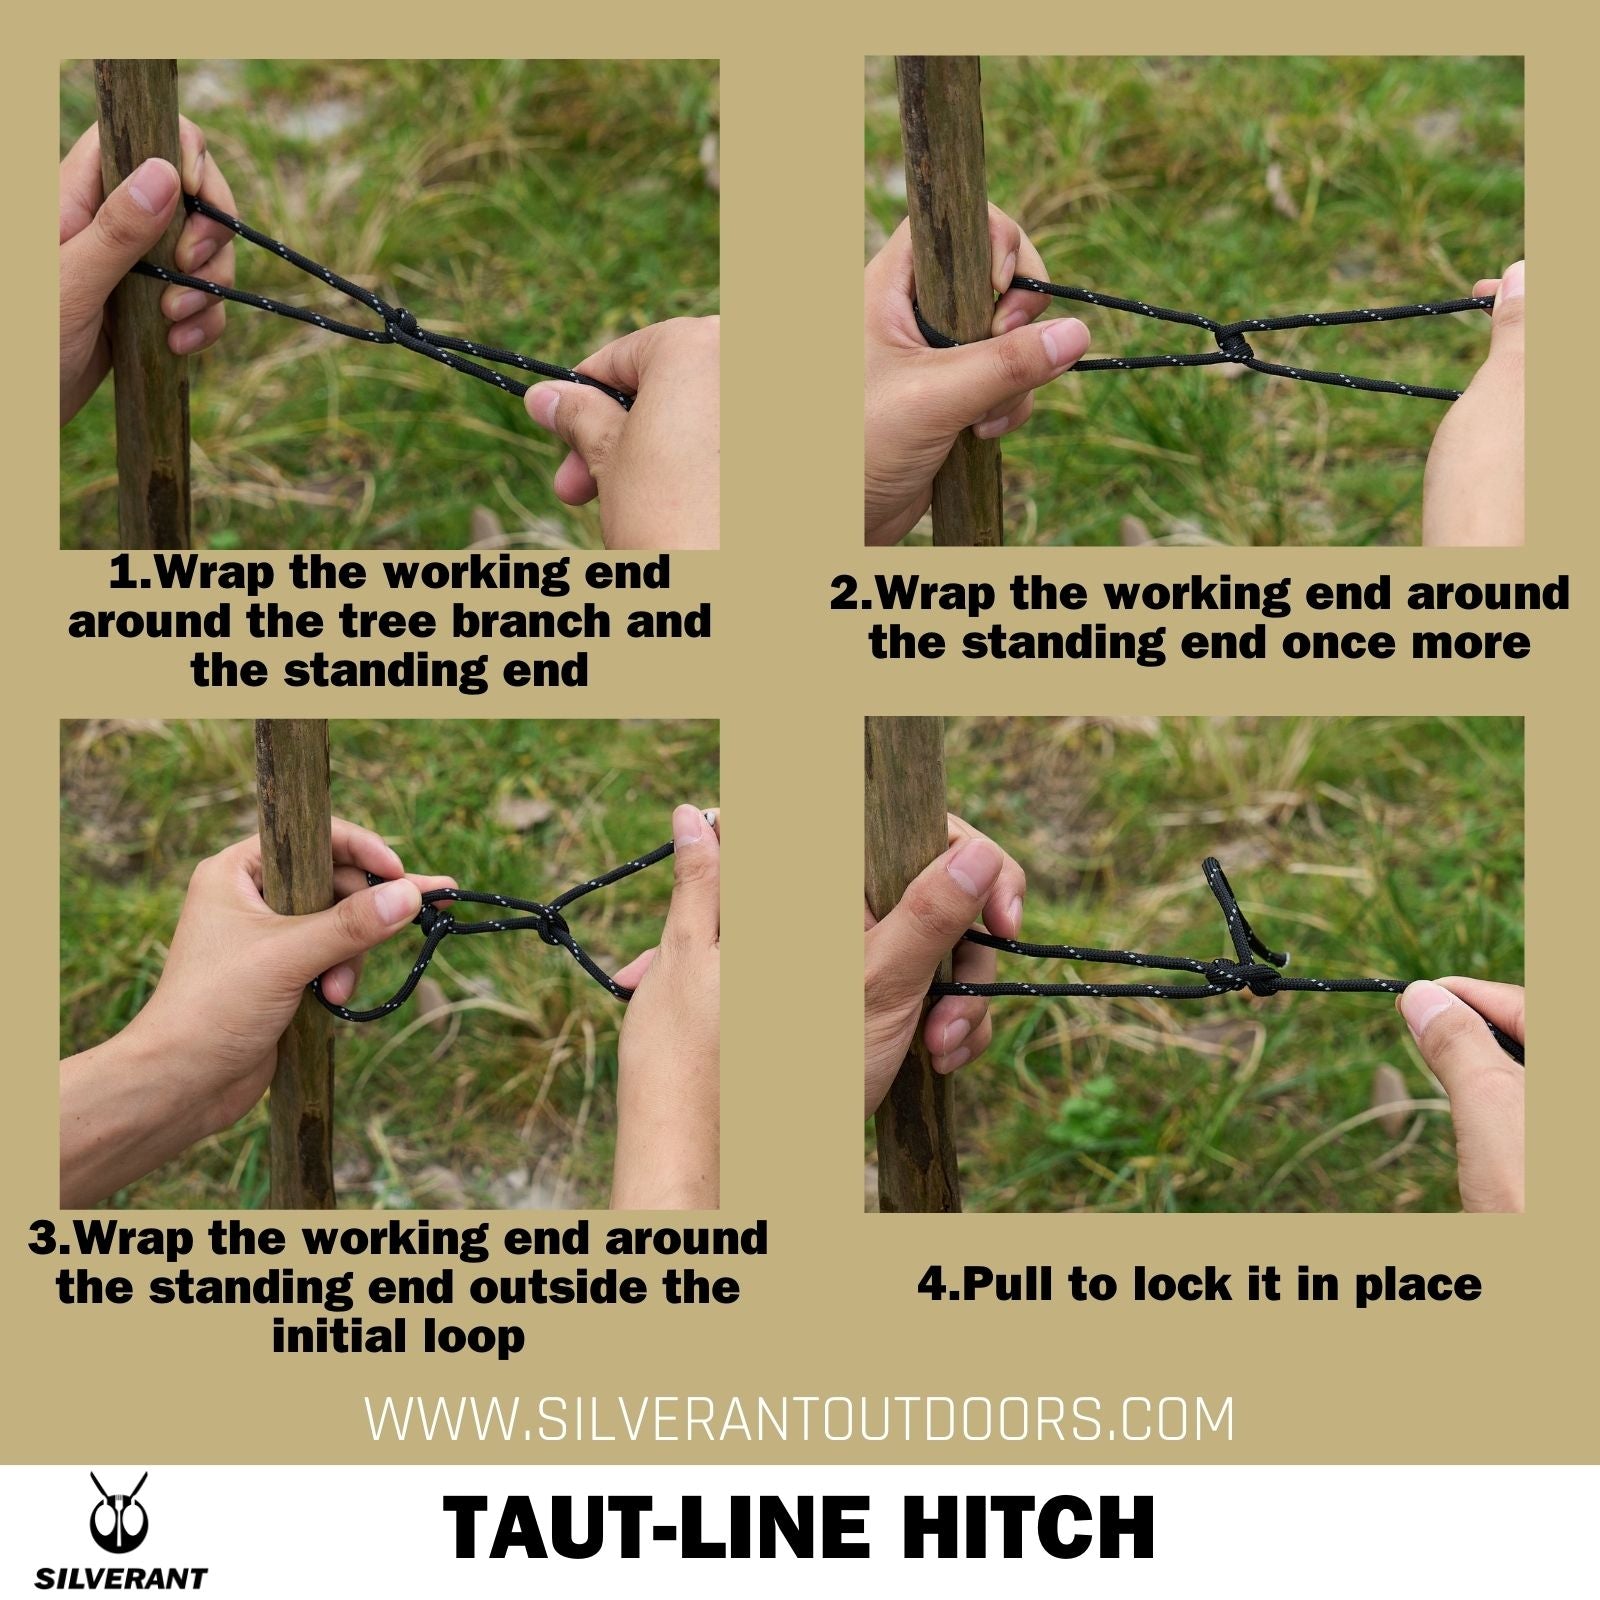 Taut-Line Hitch